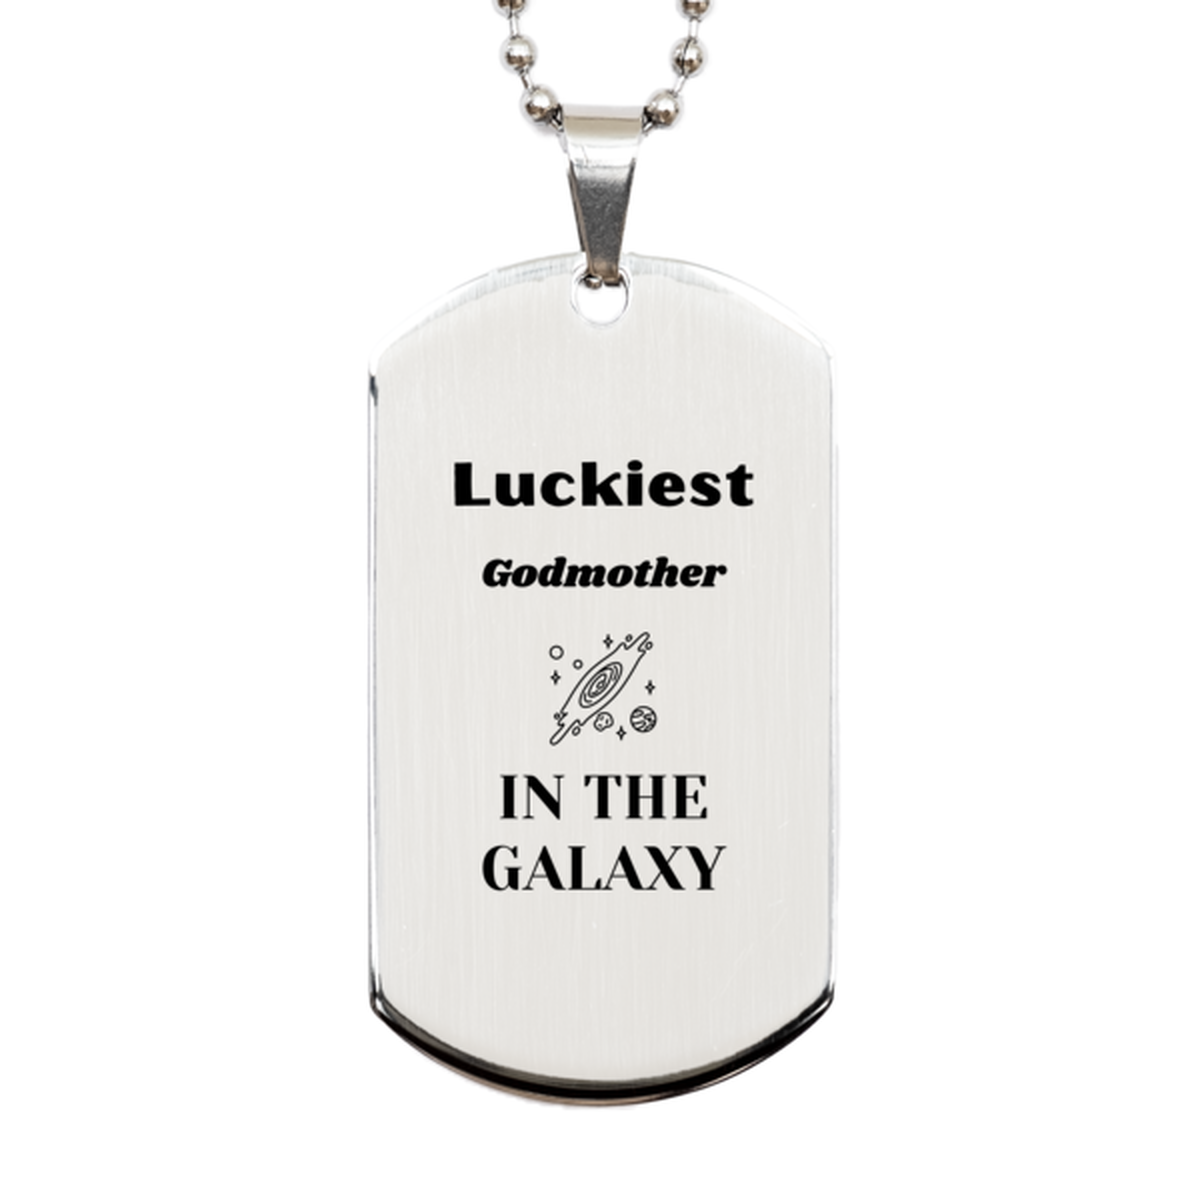 Luckiest Godmother in the Galaxy, To My Godmother Engraved Gifts, Christmas Godmother Silver Dog Tag Gifts, X-mas Birthday Unique Gifts For Godmother Men Women